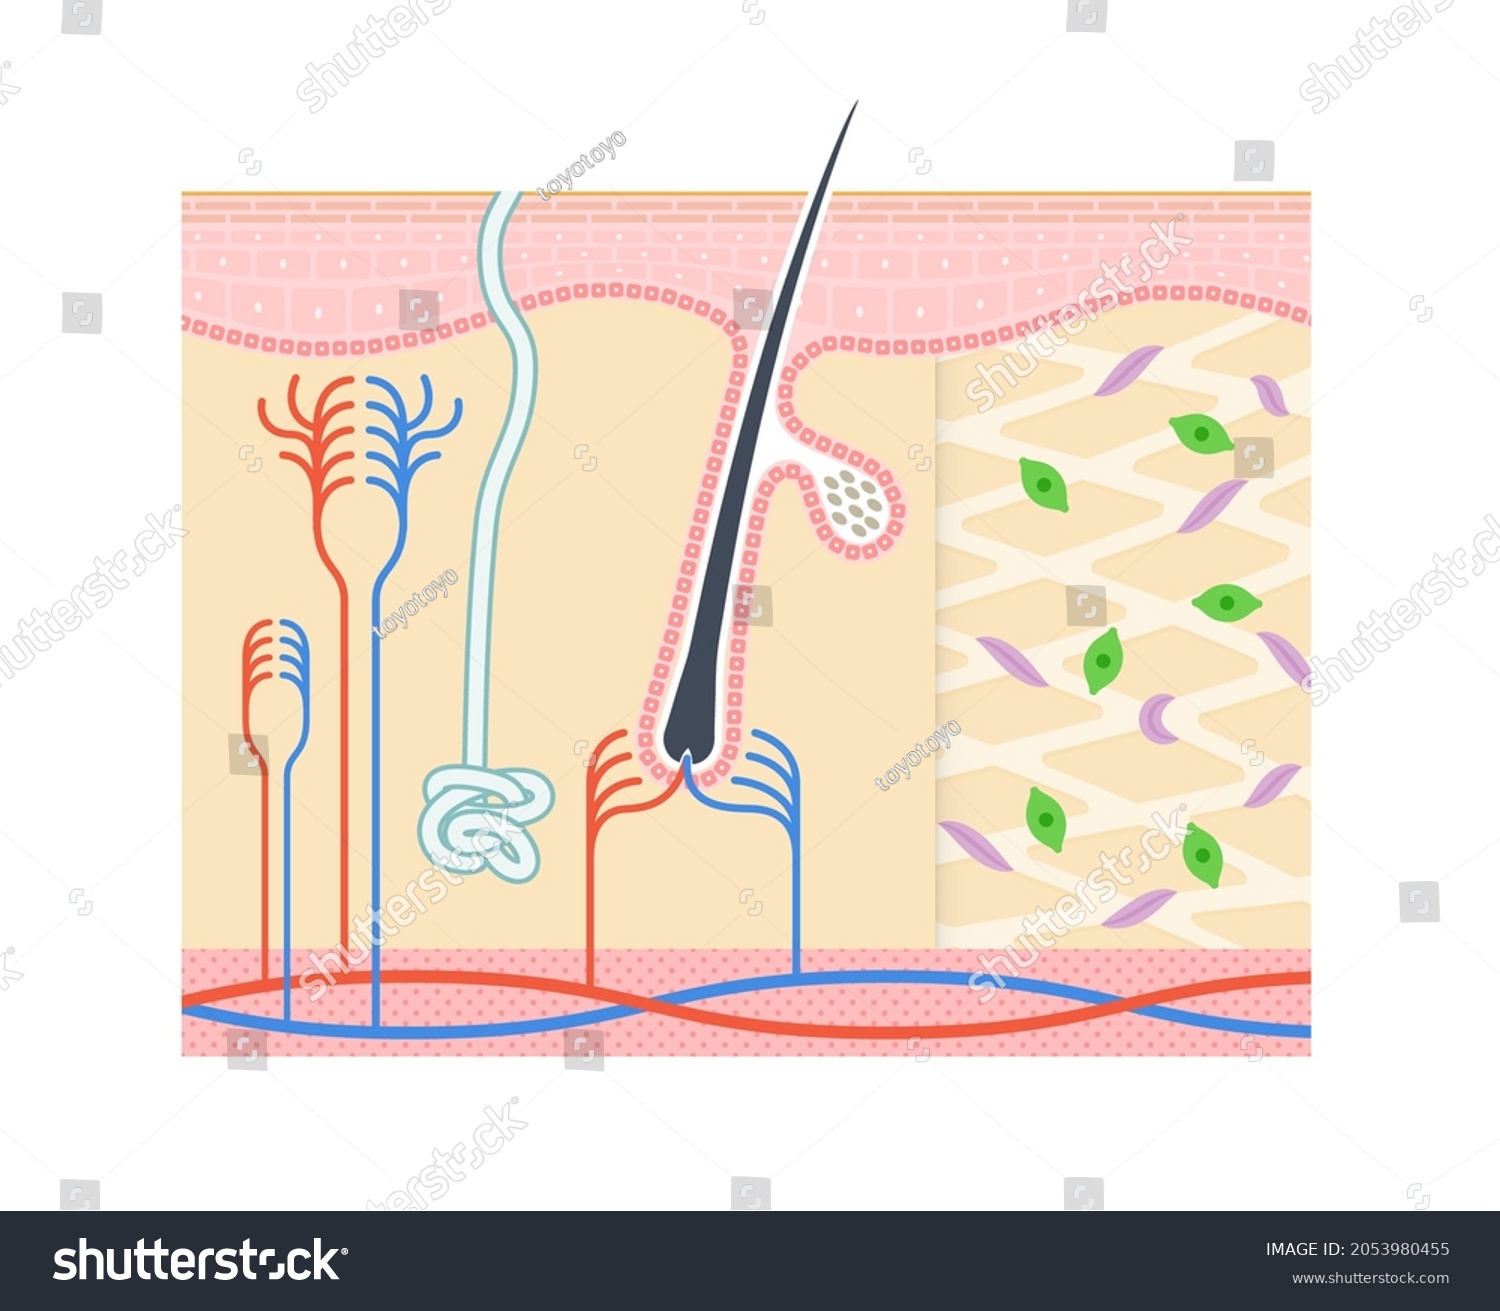 Illustration Showing Structure Dermis Notation Stock Vector (Royalty ...